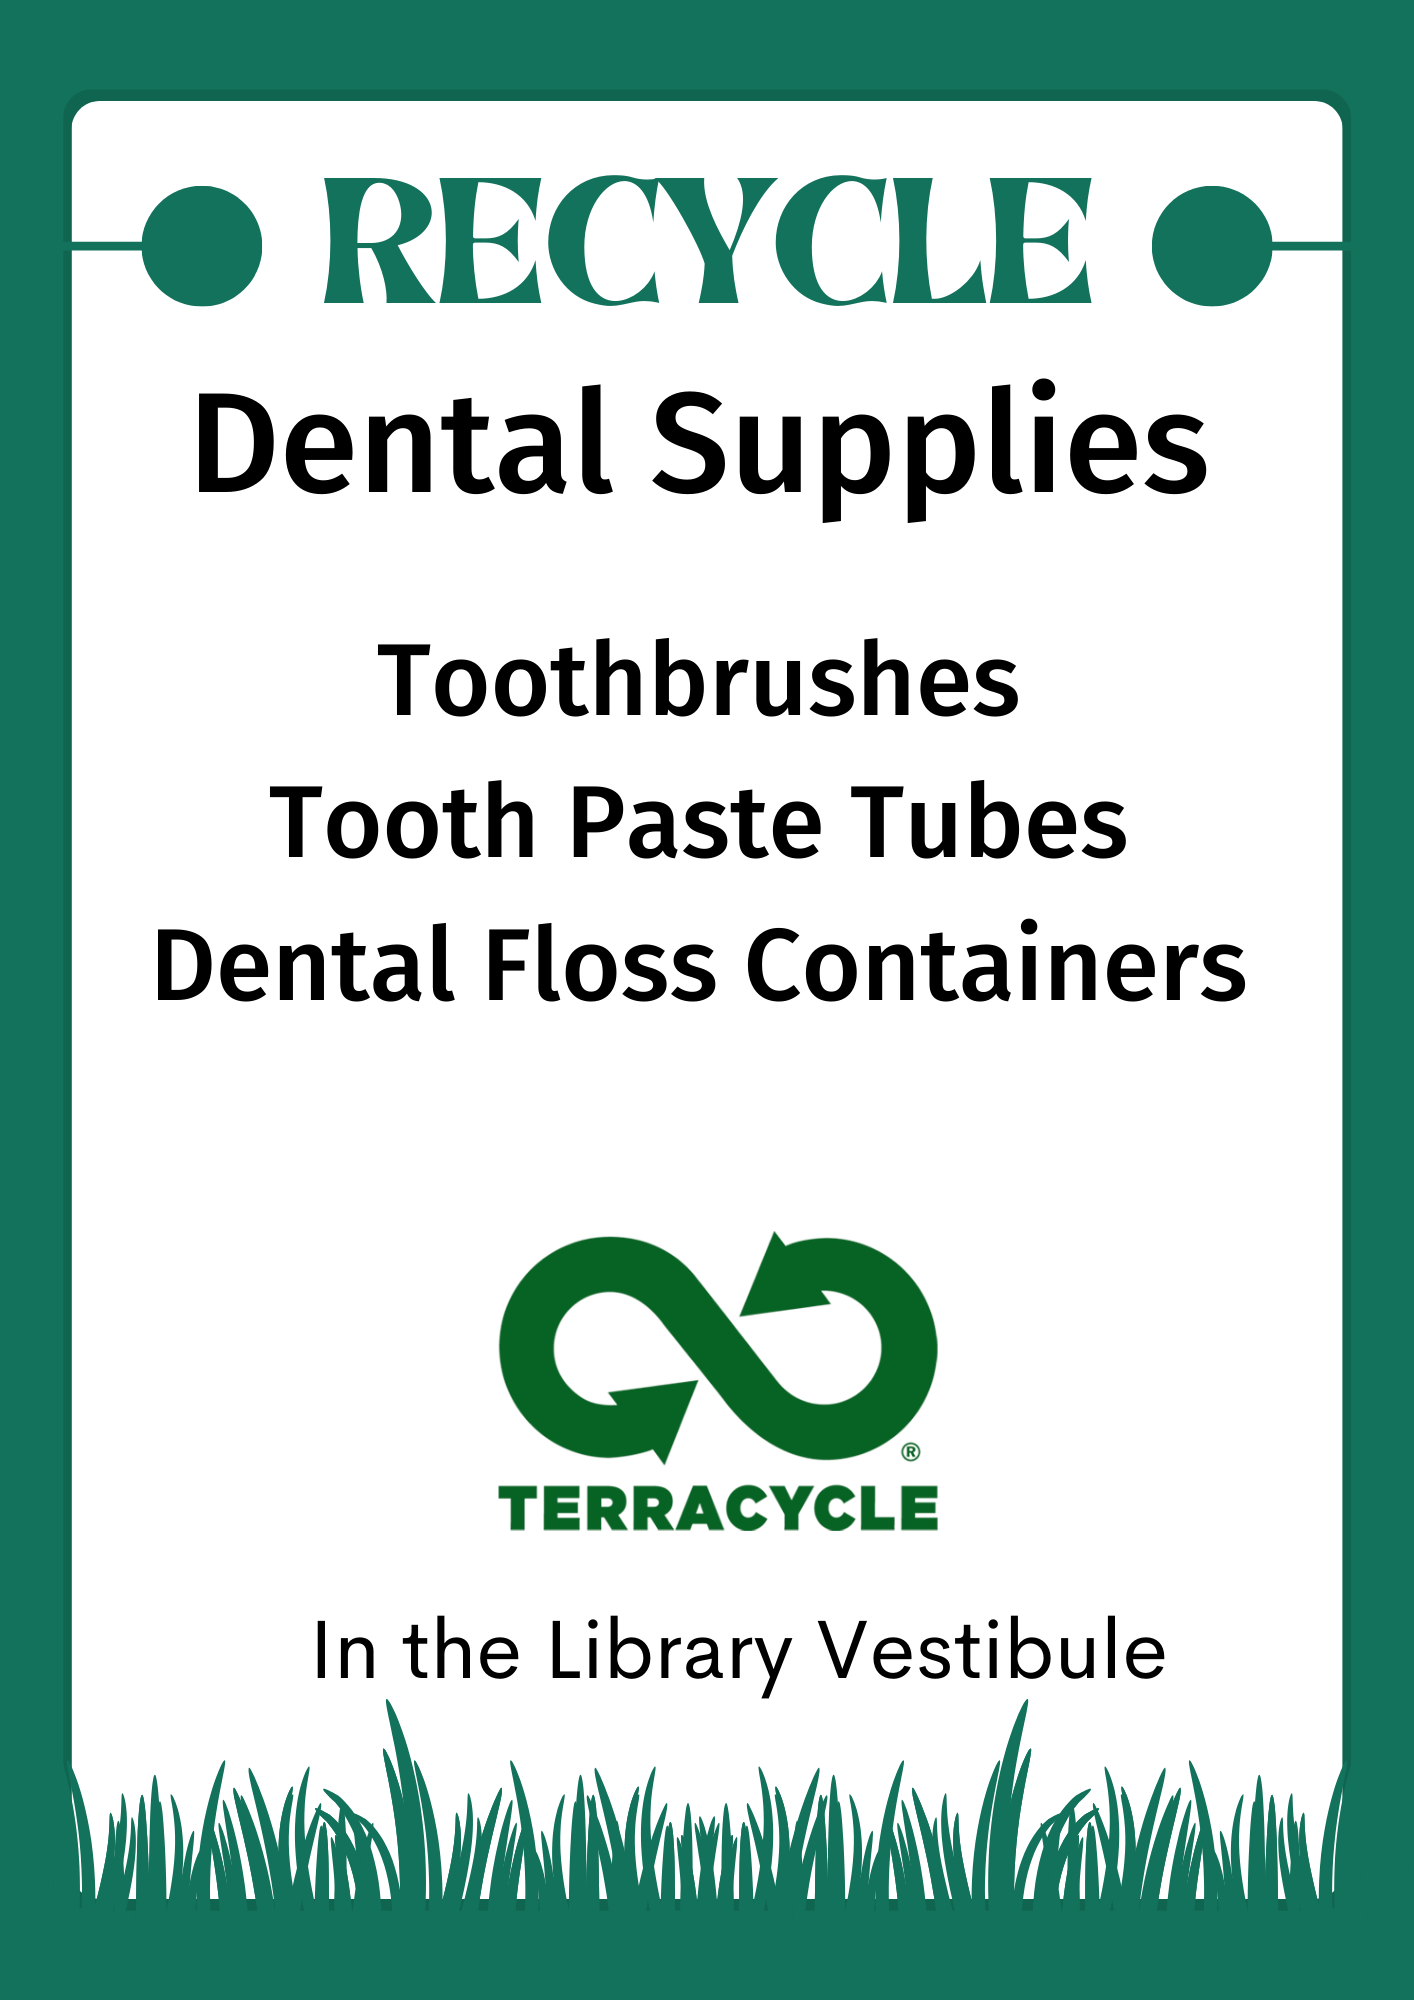 Recycle dental supplies: toothbrushes, toothpaste containers, dental floss containers in the library vestibule. Terracycle